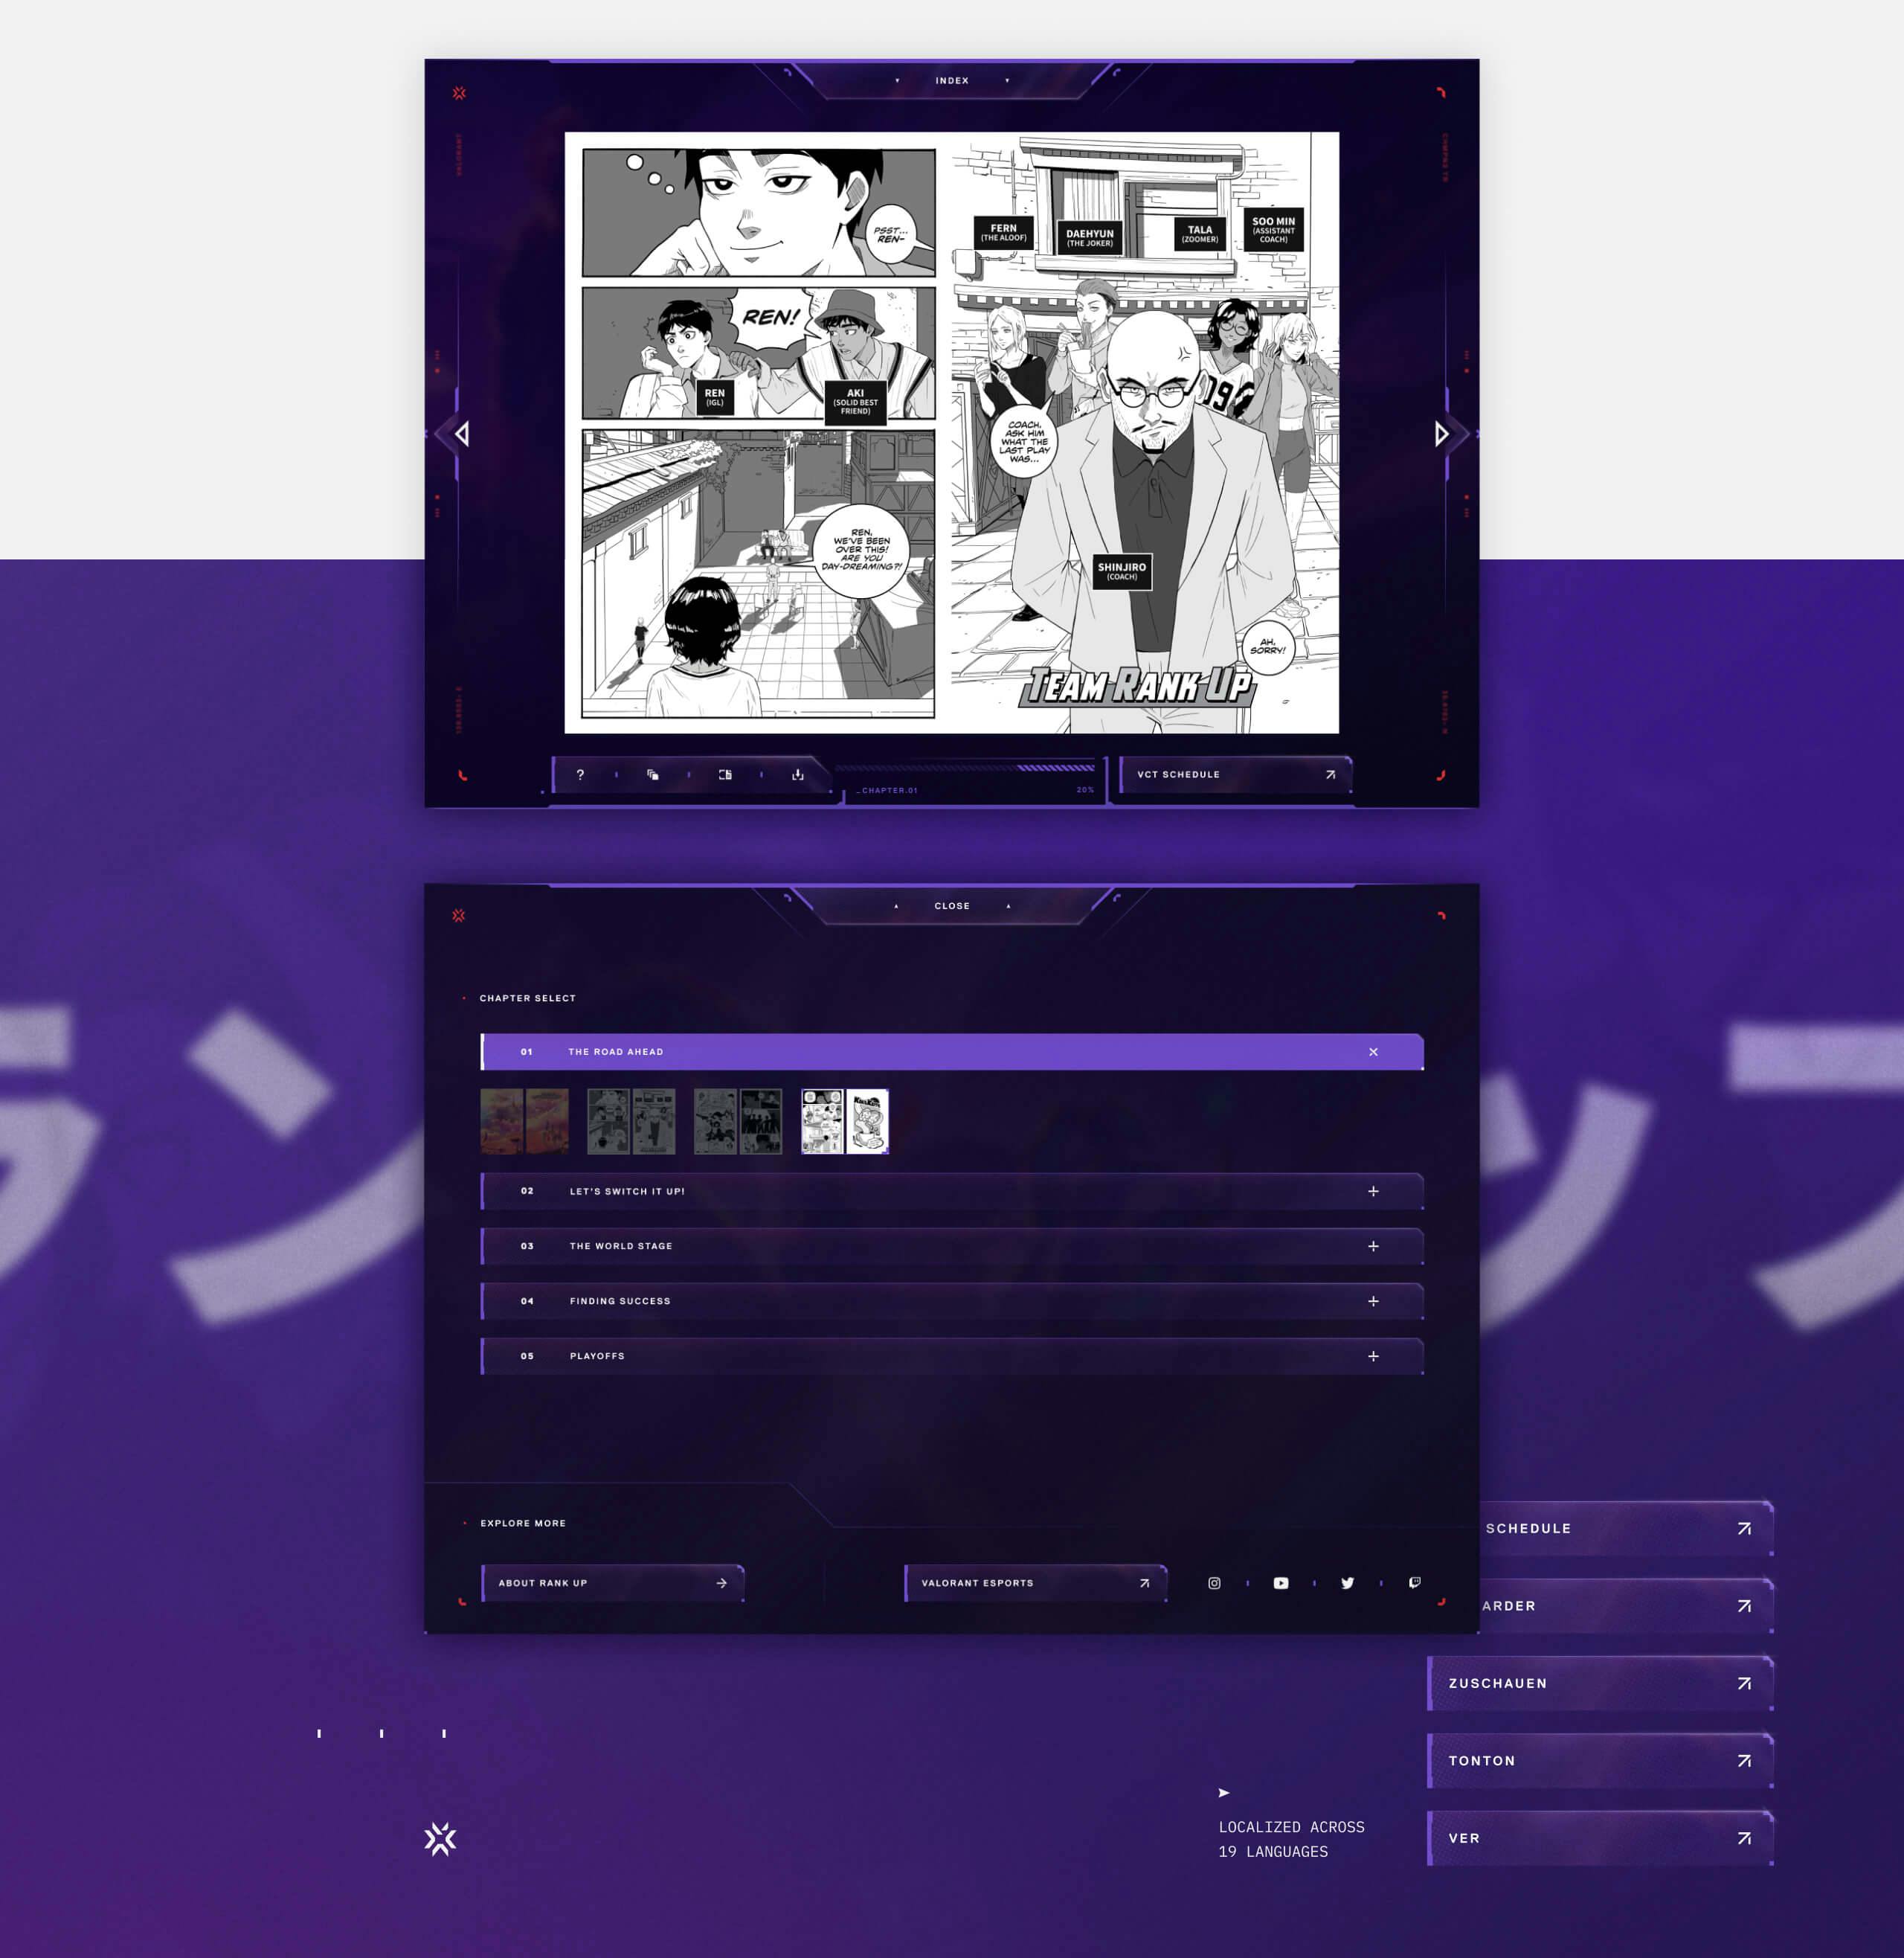 A simple landing page created so that fans could download the manga. This part of the page features some of the art from the manga as well as UI in the game Valorant's style.